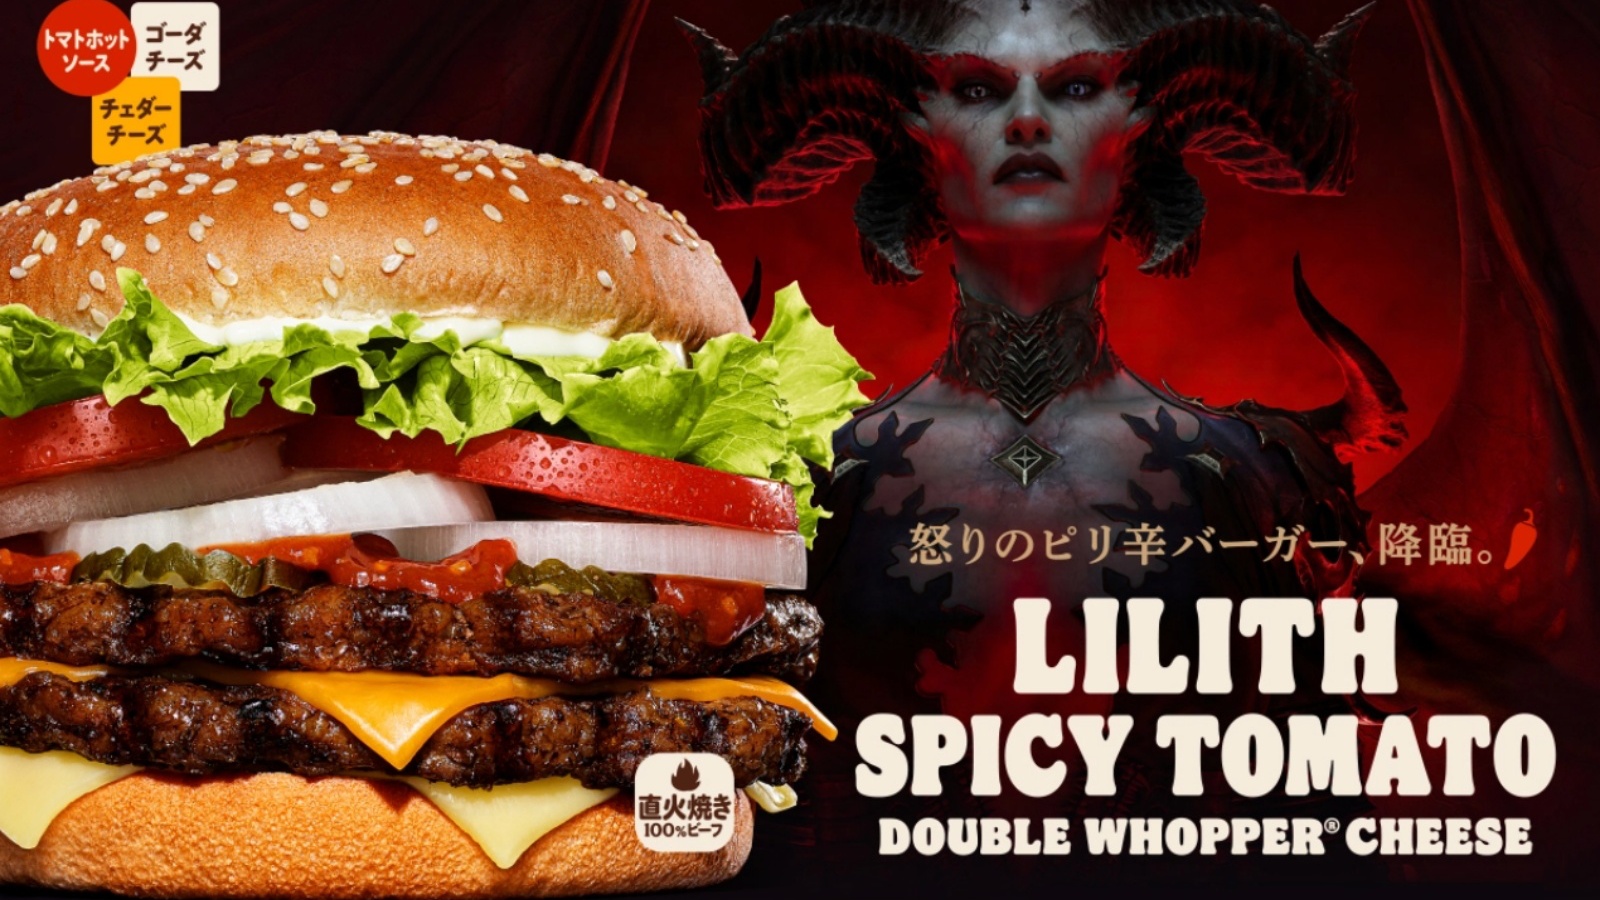 Burger King Japan celebrates Diablo 4 with Spicy Double Whopper